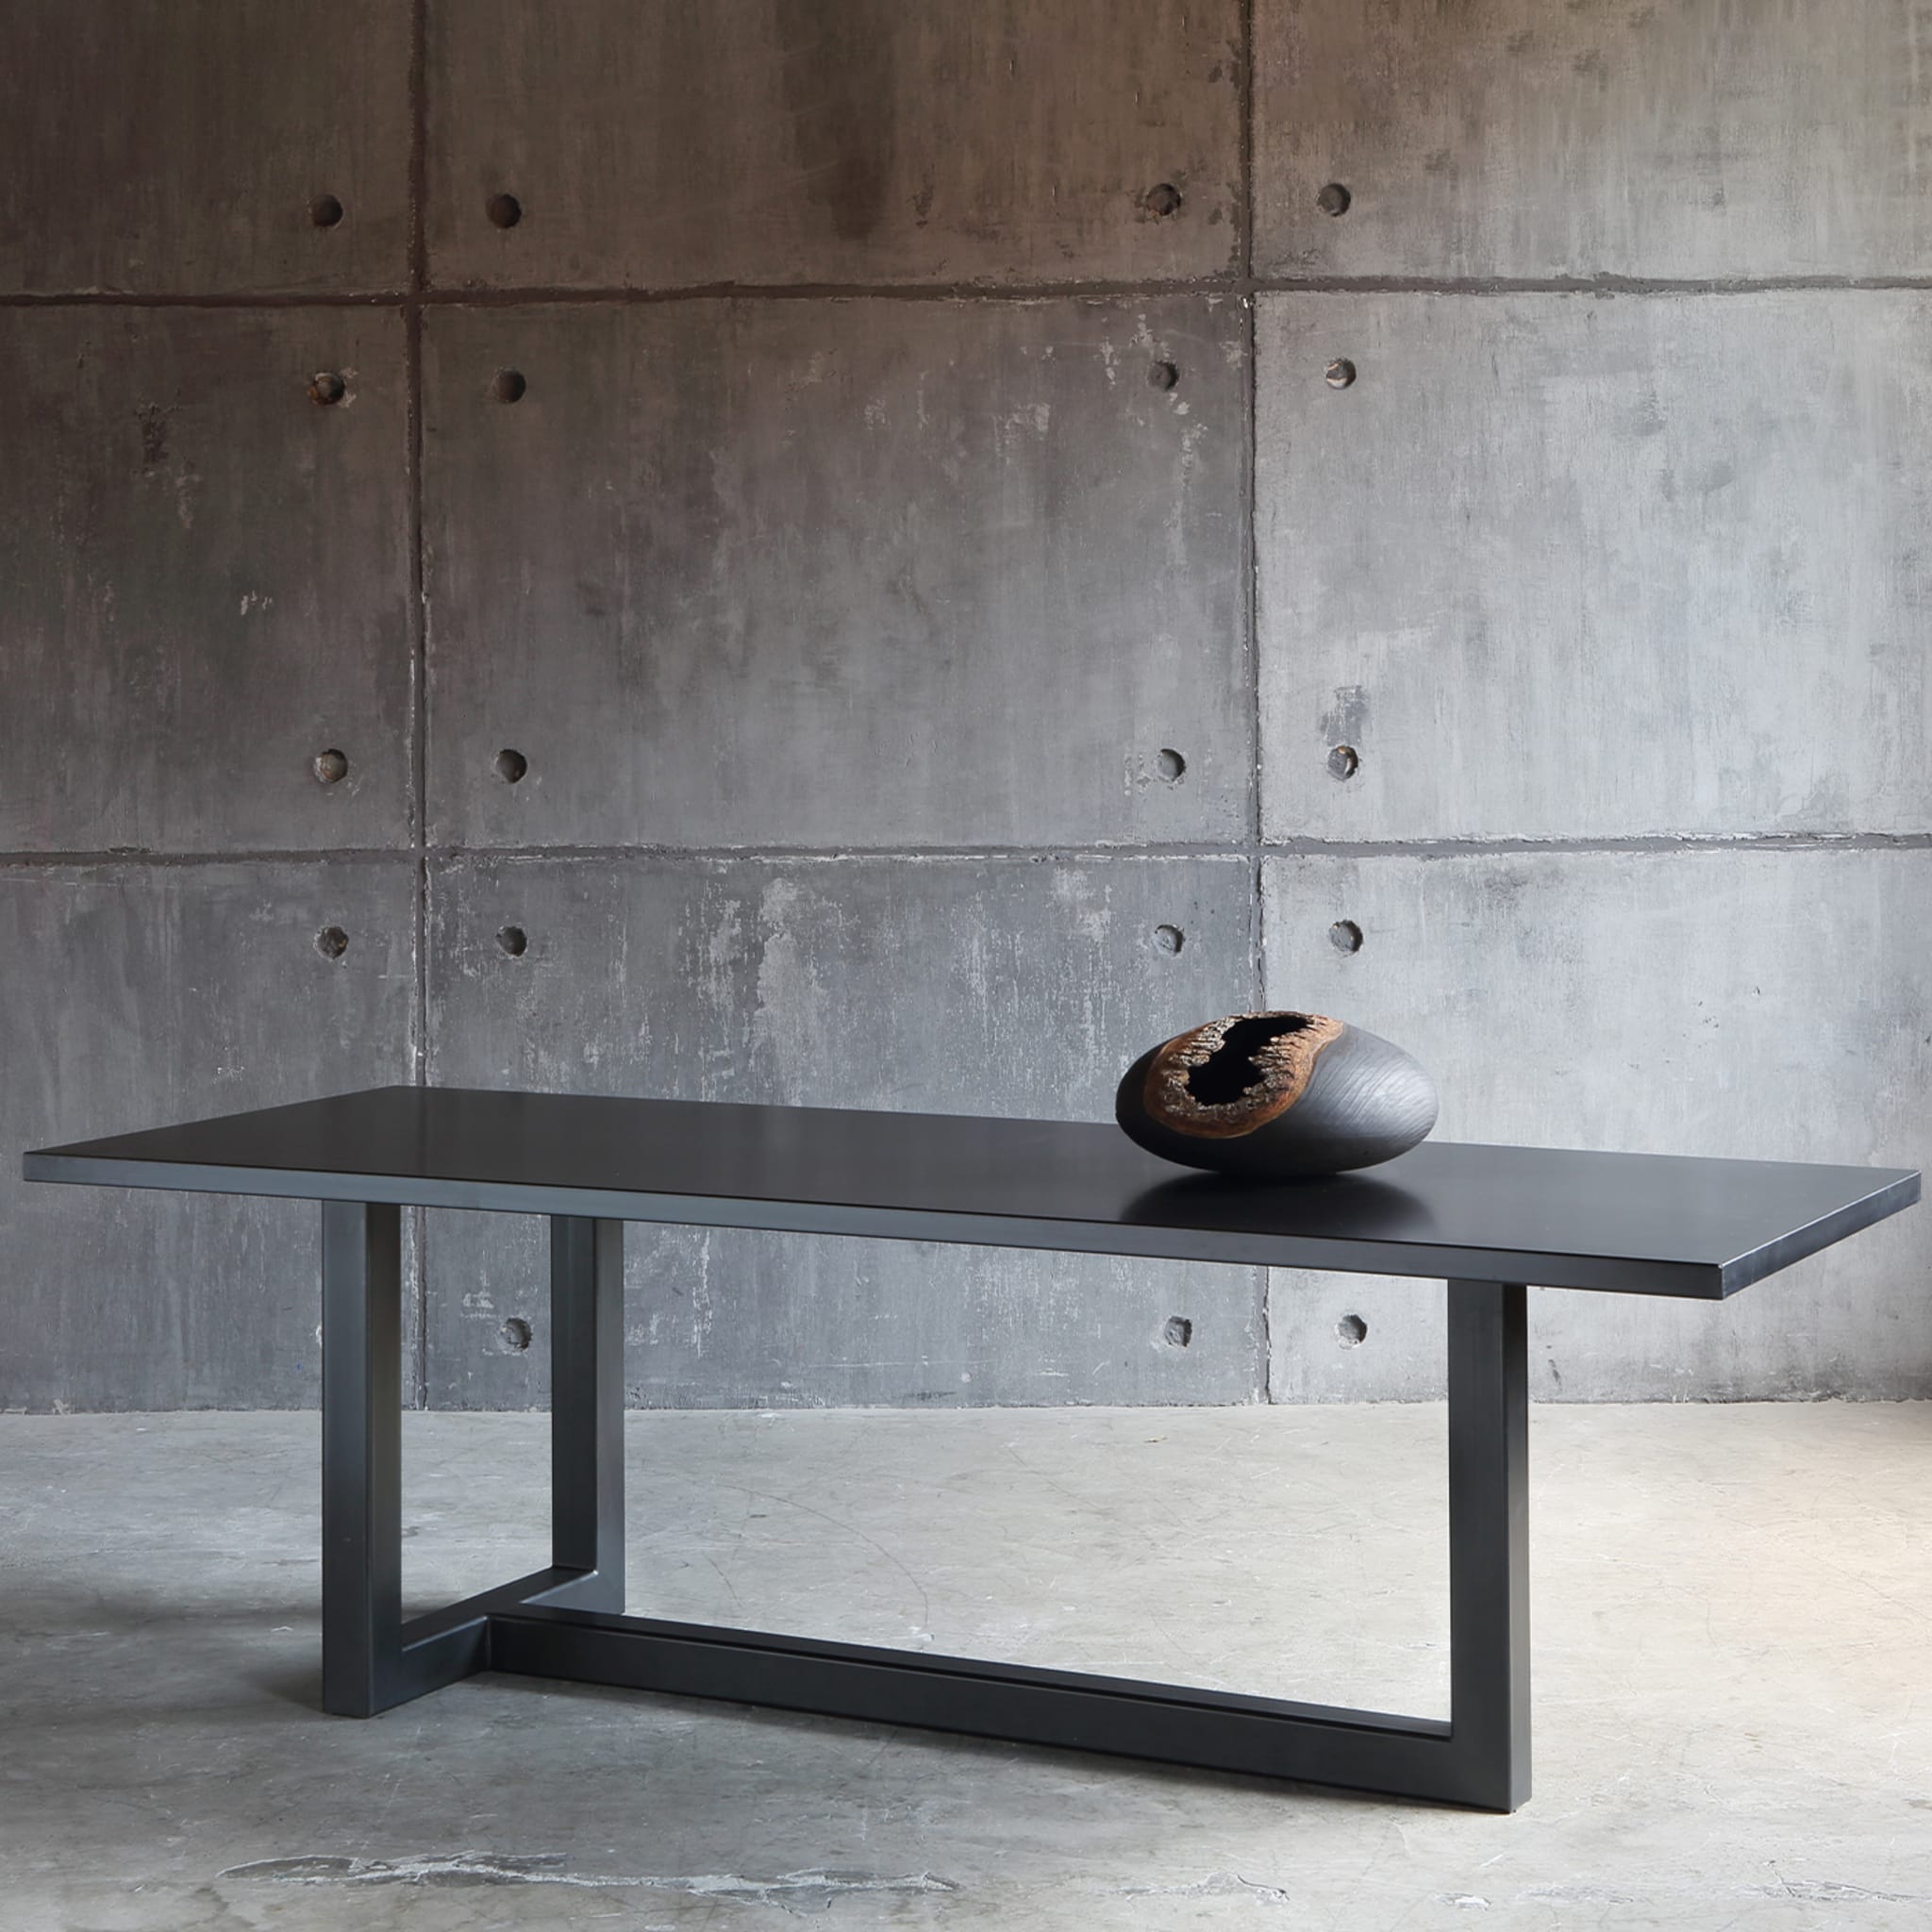 Augustin Dining Table by Maurizio Peregalli - Alternative view 1